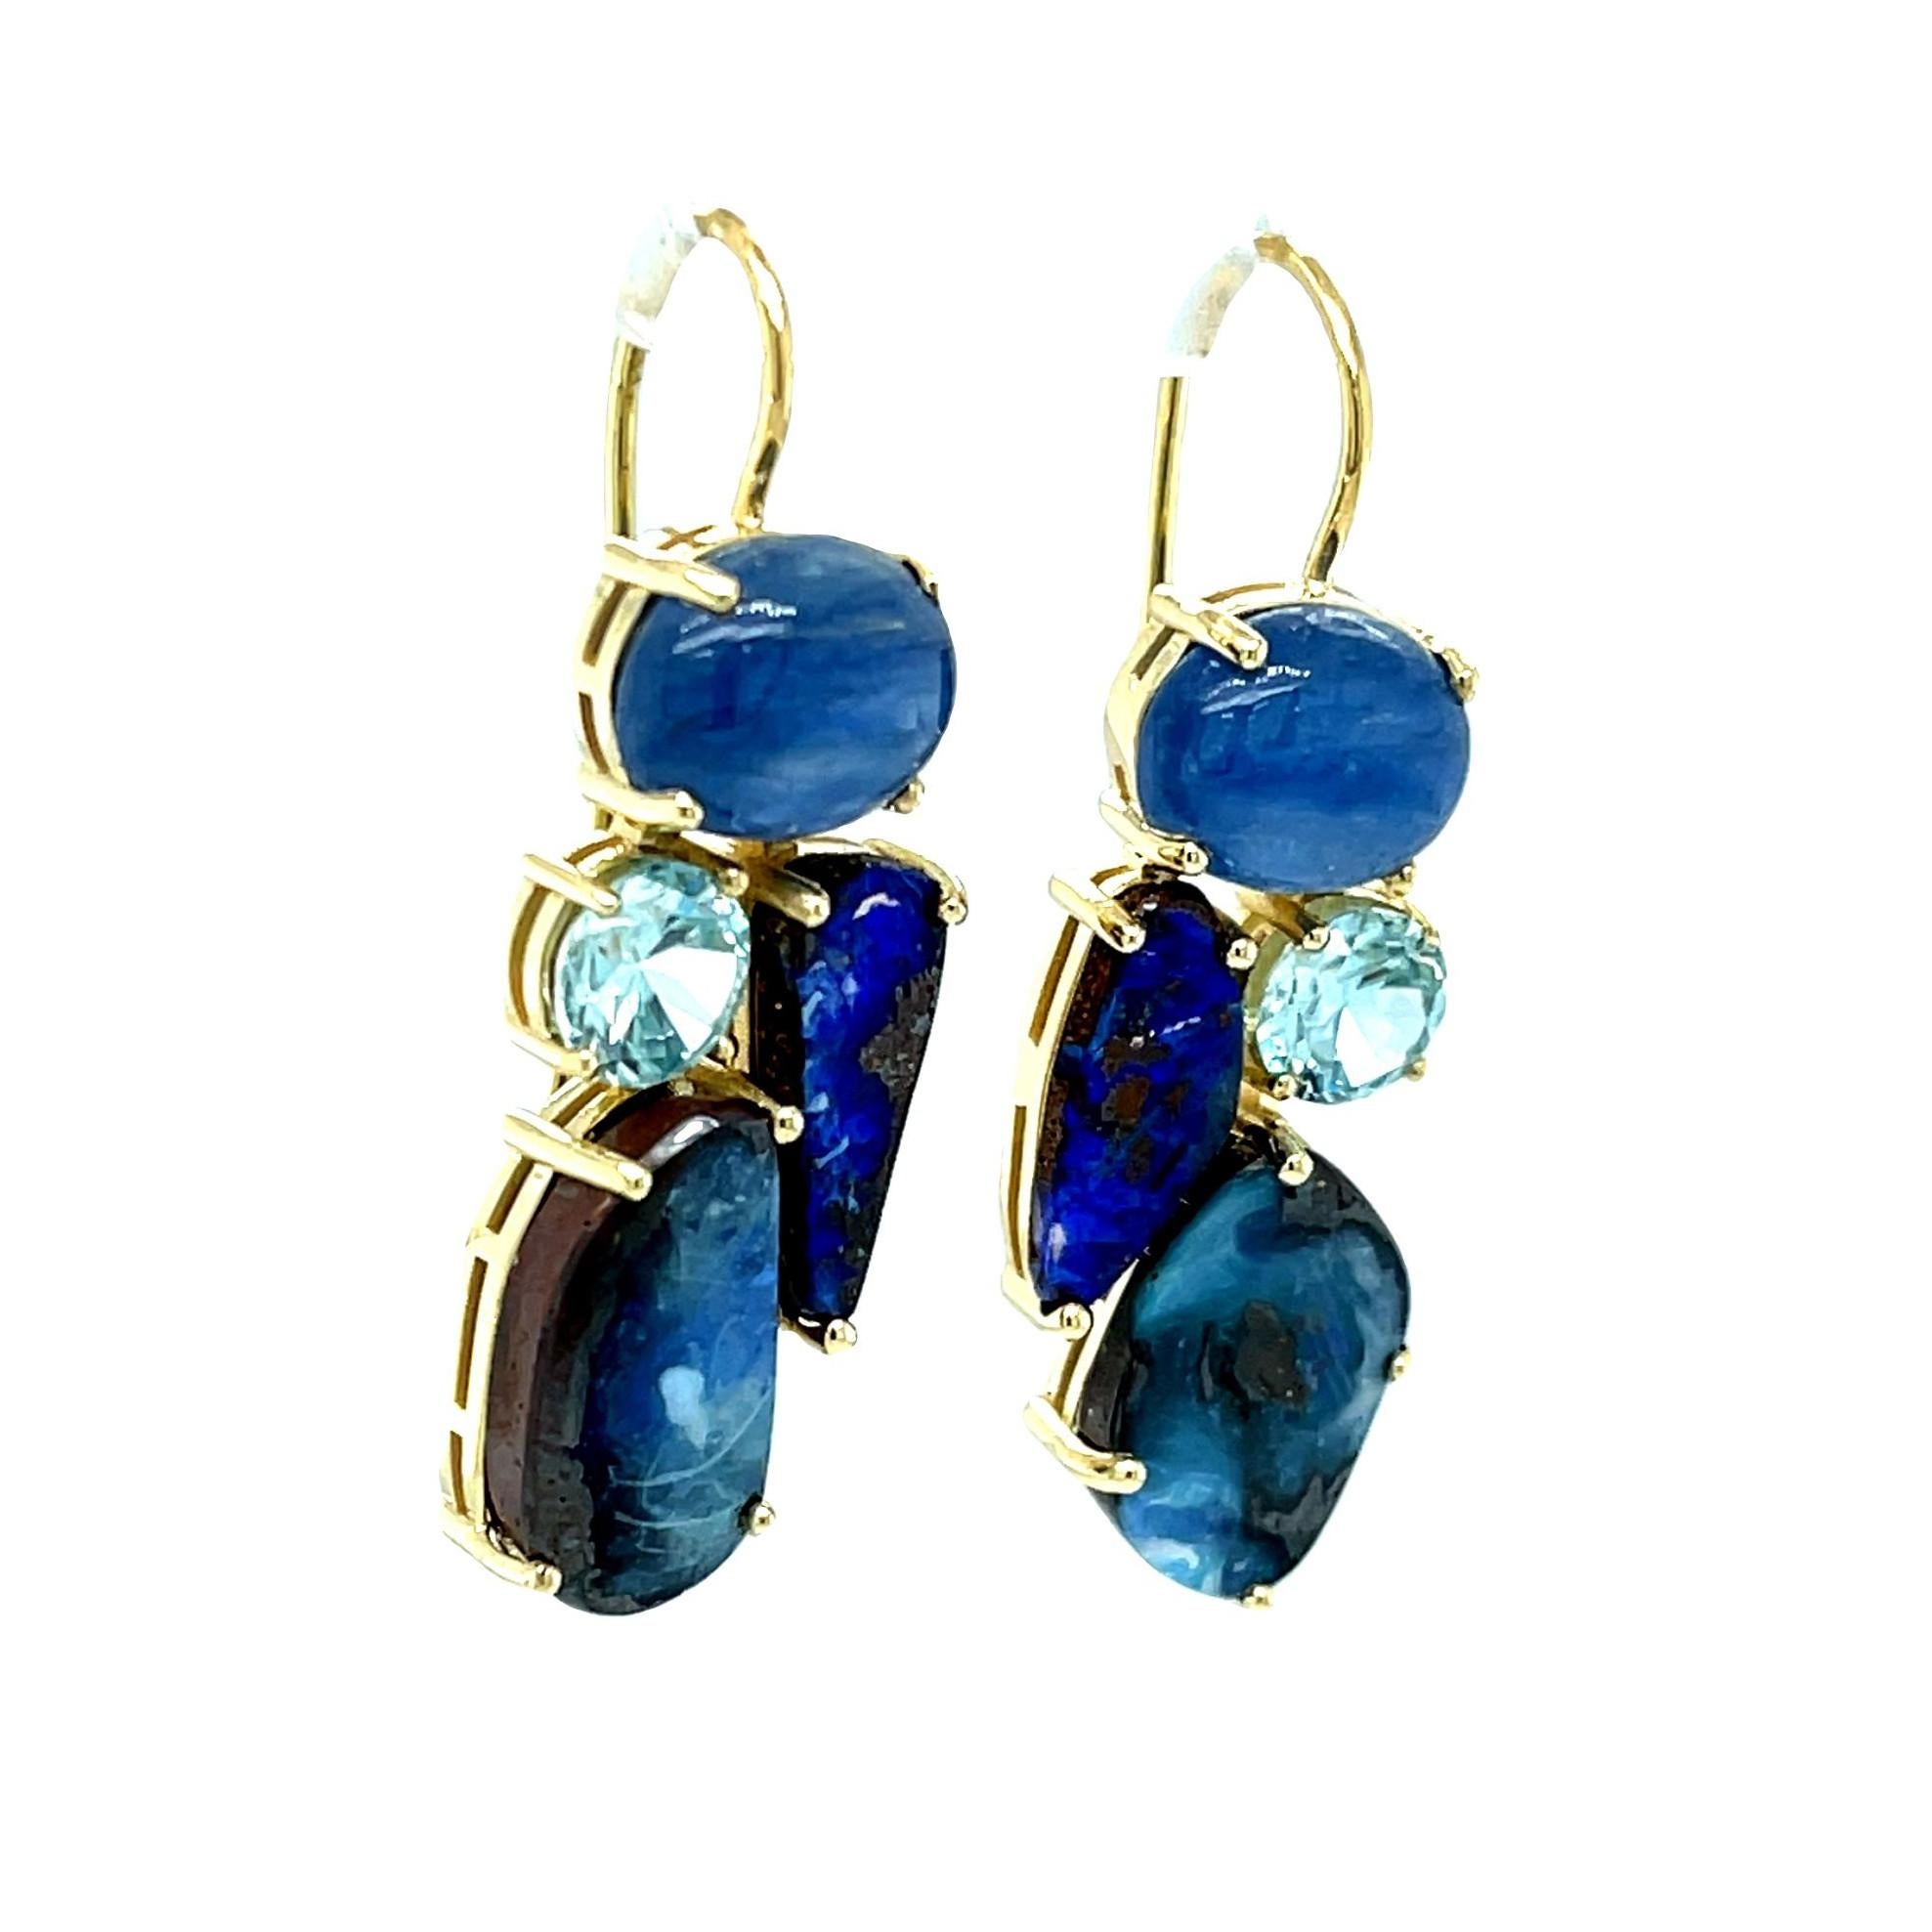 These chic, one-of-a-kind earrings feature a beautiful color combination of blue boulder opals, blue topaz, and kyanite, a lovely mineral often mistaken for blue sapphire. A really fun pair of earrings that can look Bohemian or black-tie elegant,